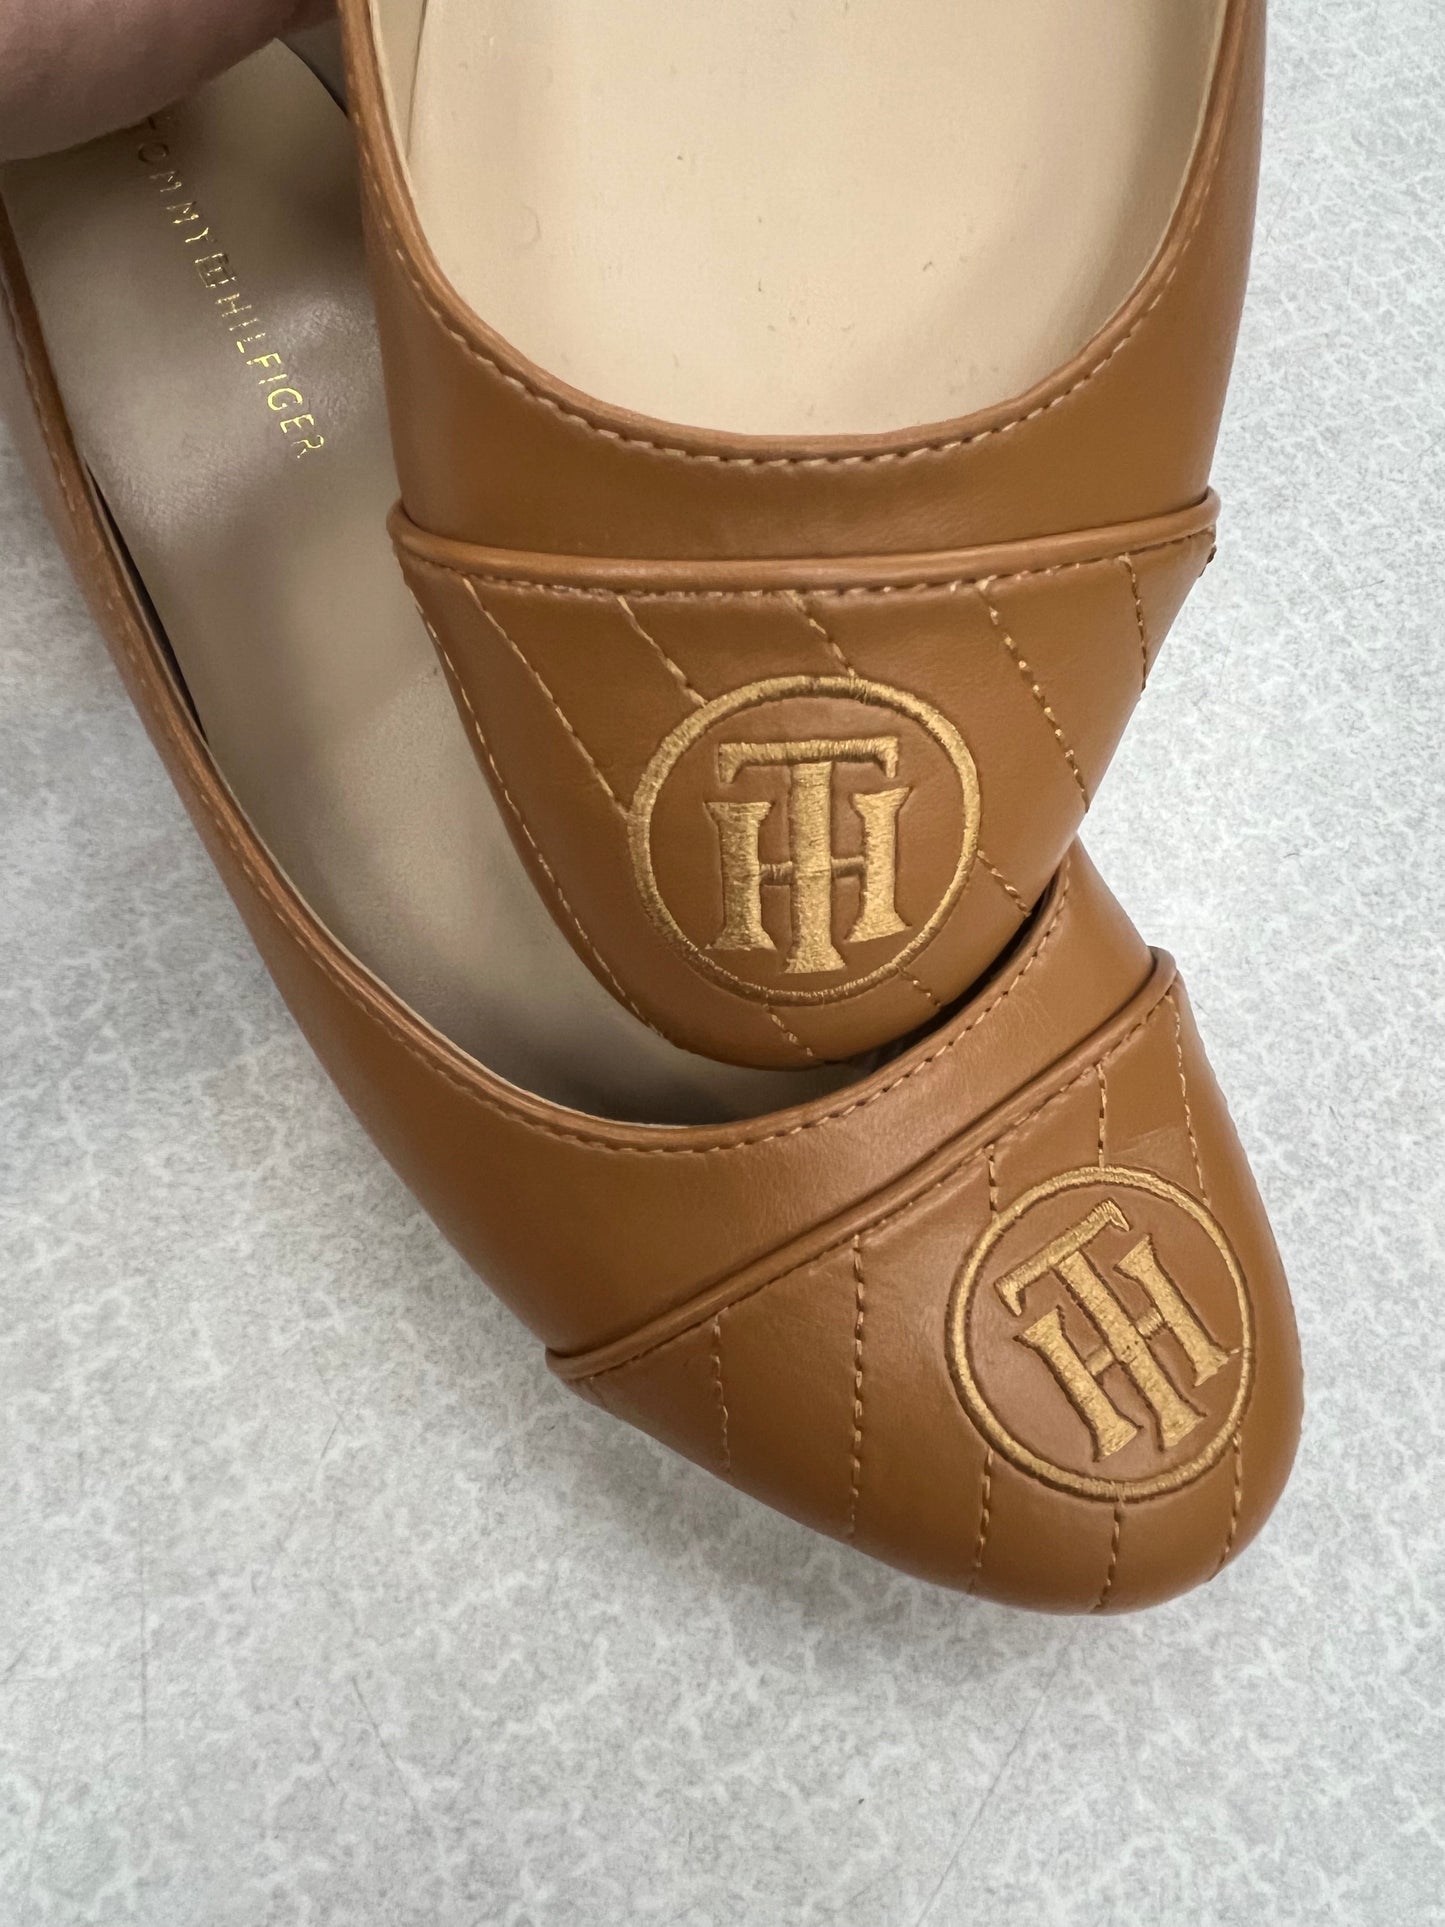 Shoes Flats Ballet By Tommy Hilfiger  Size: 8